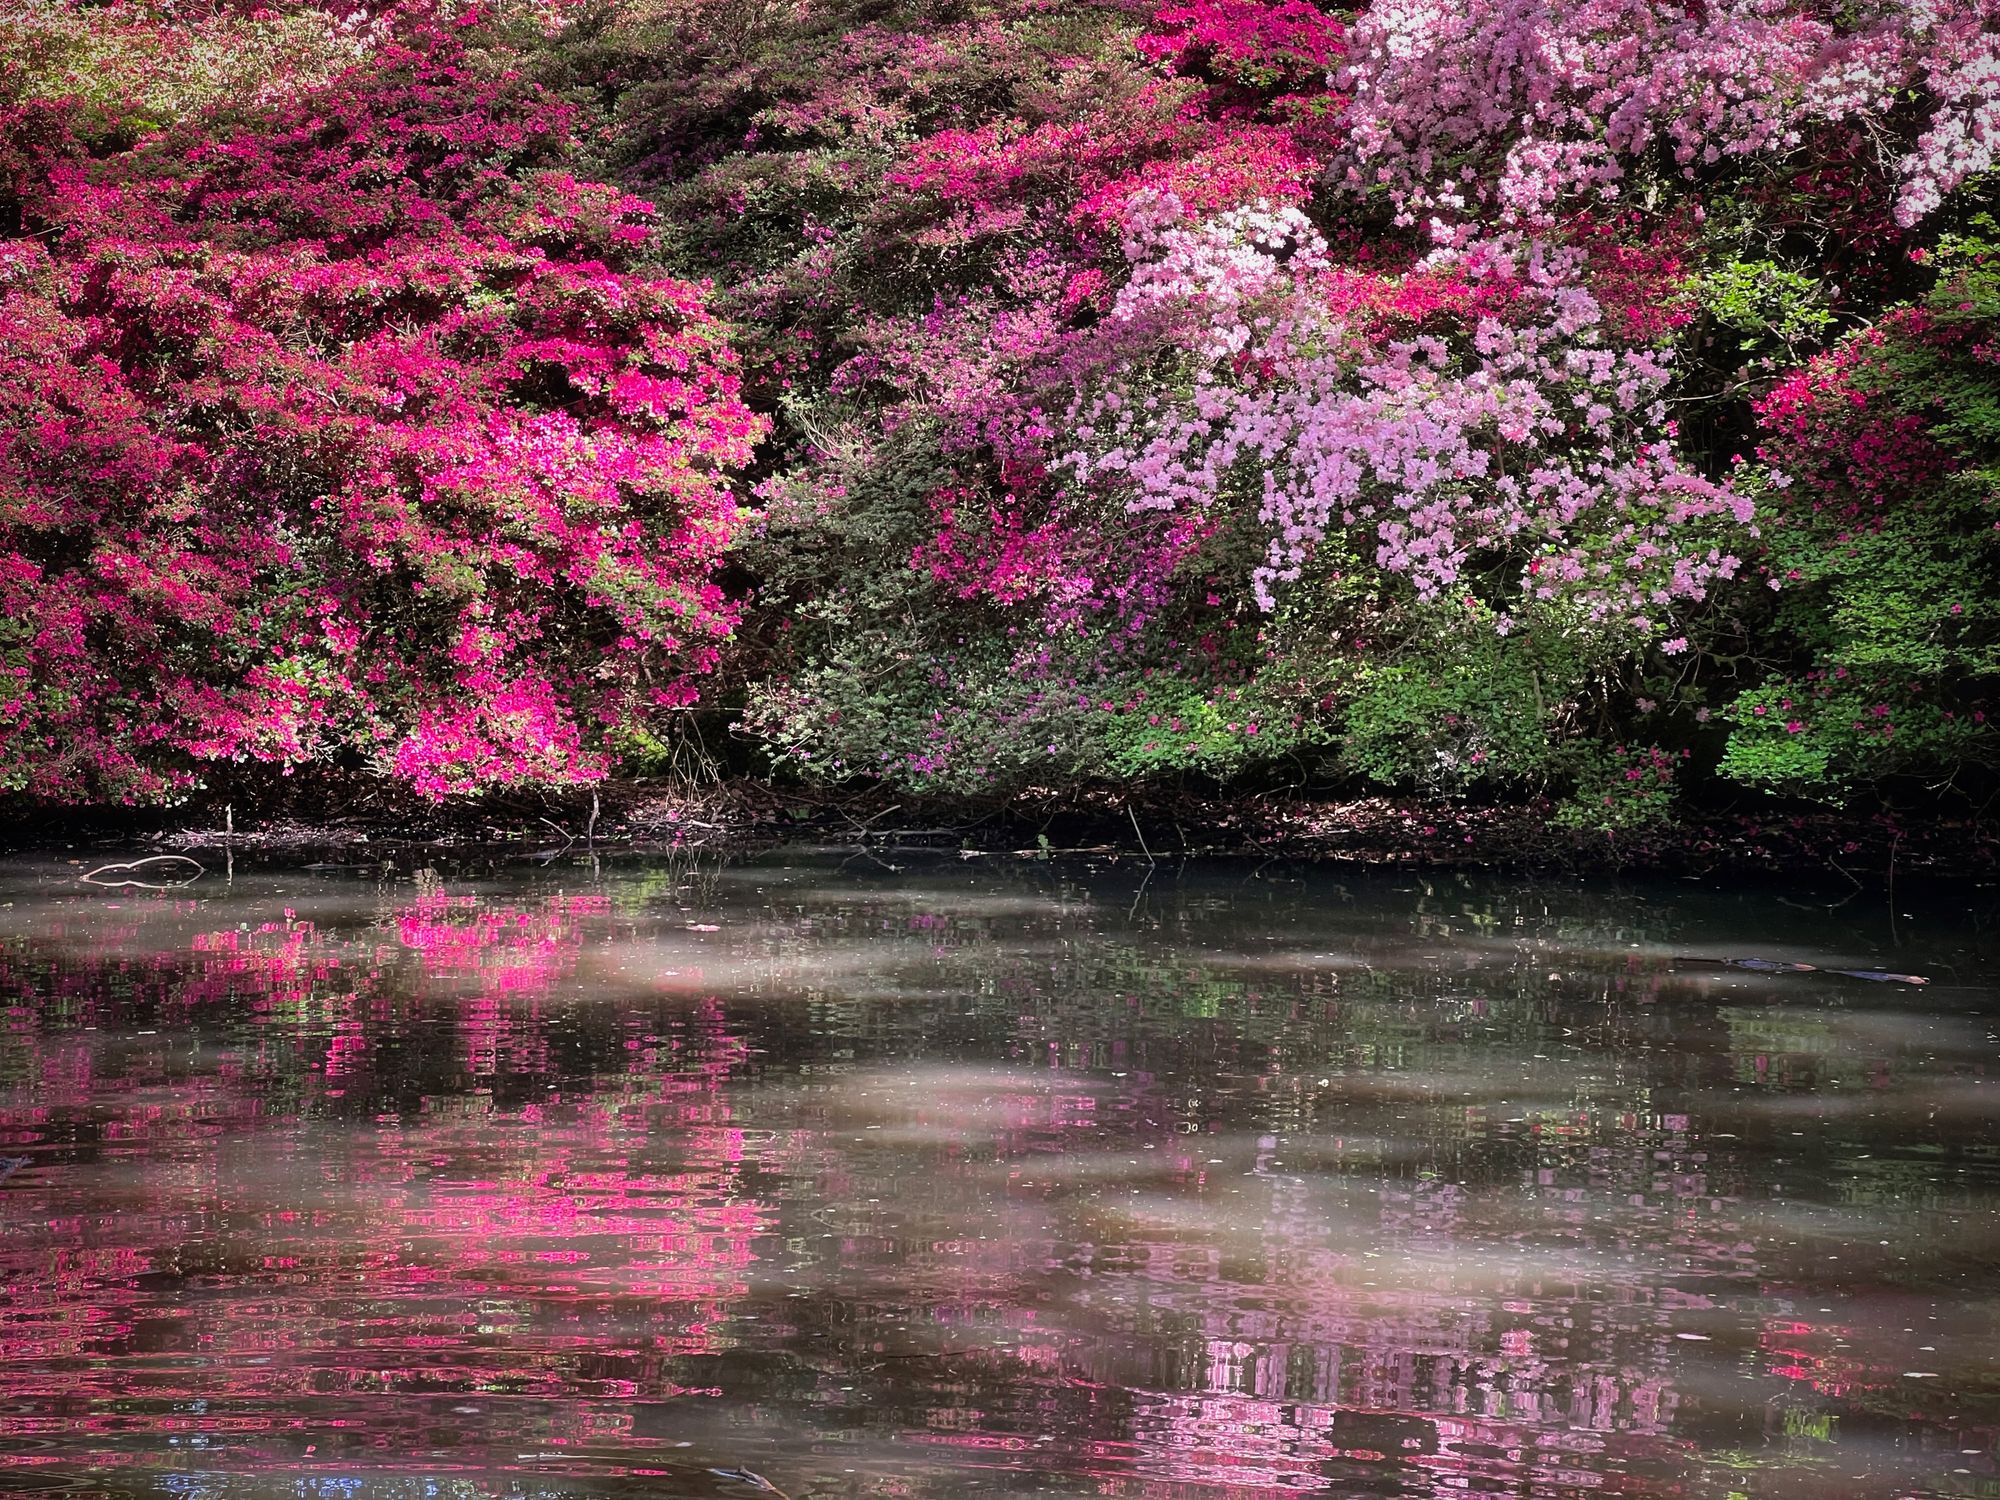 A small pond with the opposite bank occupied by trees peppered with red and pink flowers and green foliage.